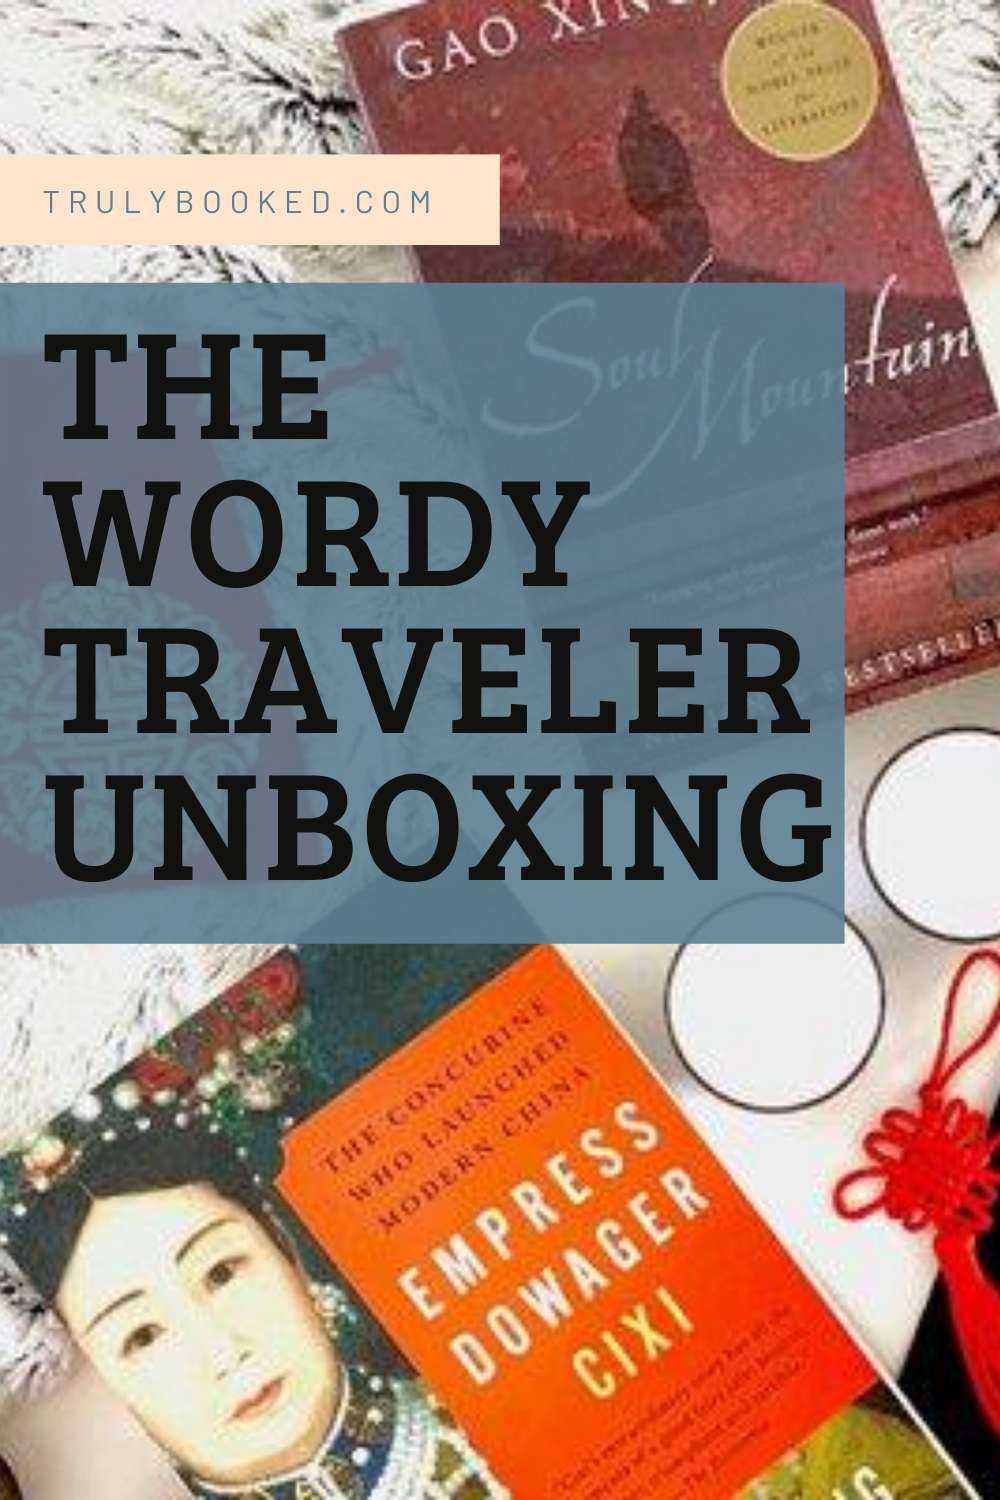 The Wordy Traveler Unboxing